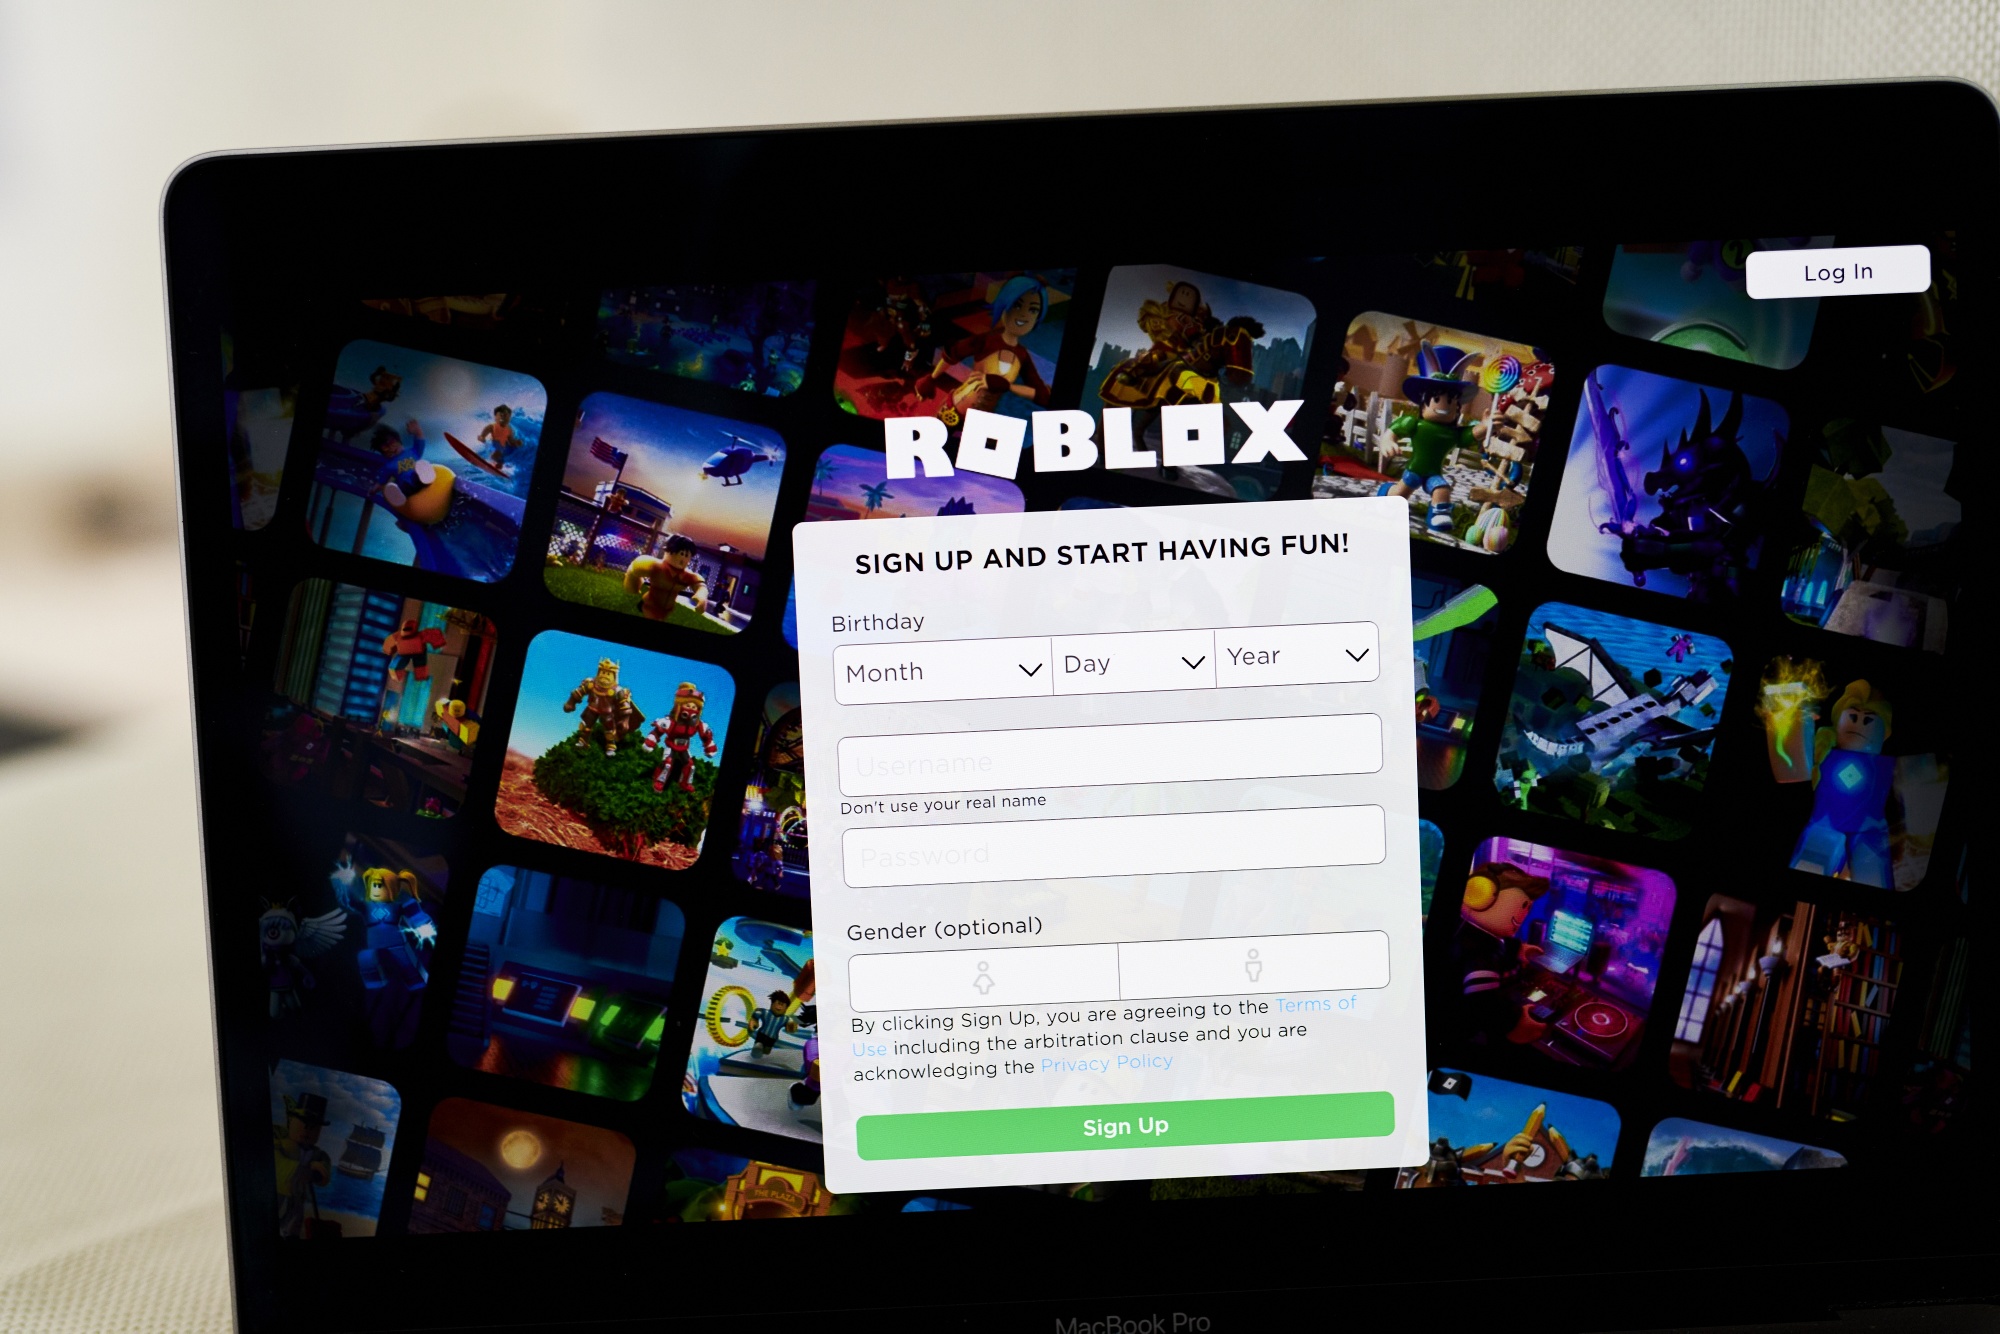 David Baszucki: 10 facts you didn't know about the Roblox founder